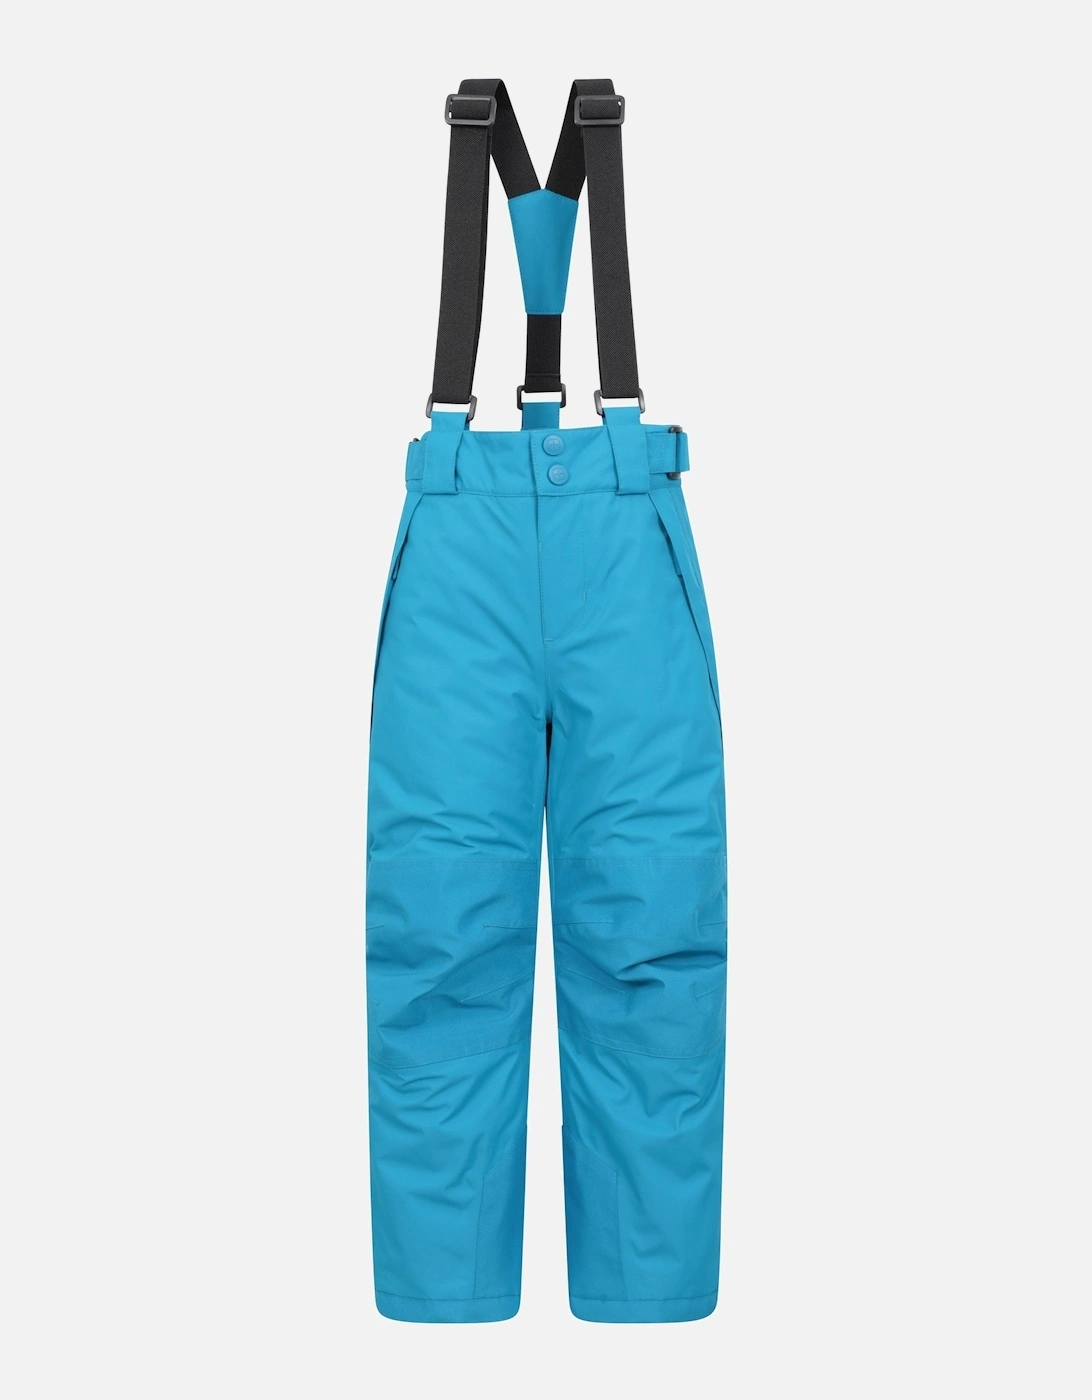 Childrens/Kids Falcon Extreme Ski Trousers, 5 of 4